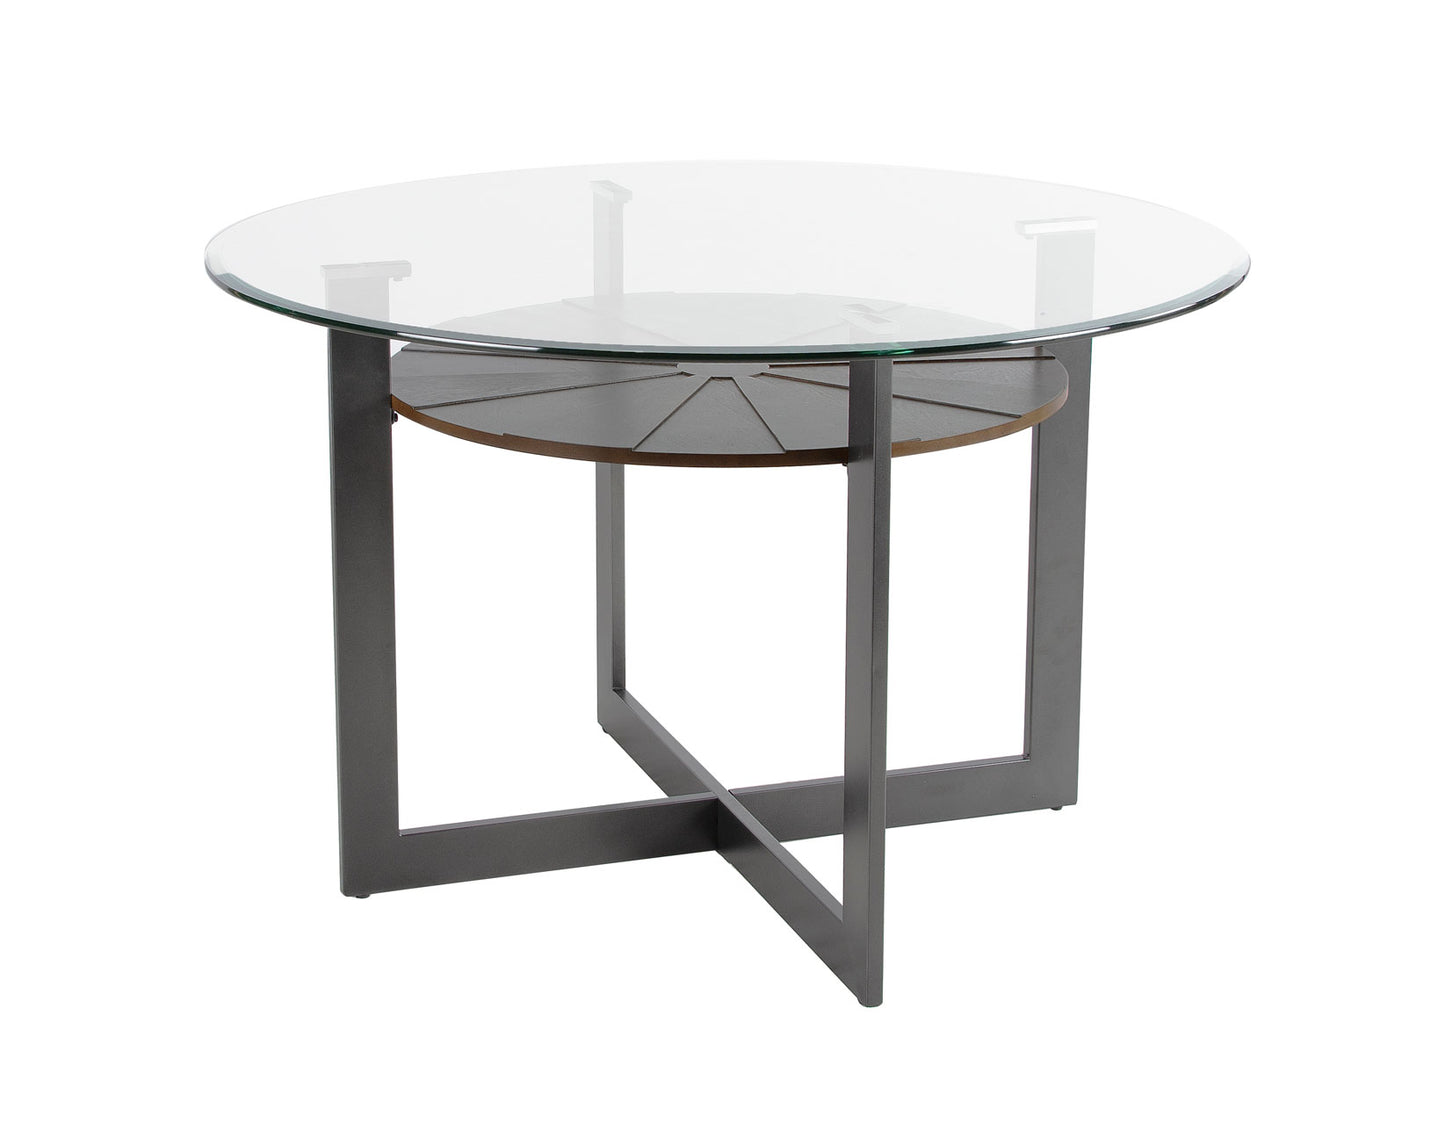 Olson 5 Piece Set
(Glass Top Table & 4 Side Chairs)